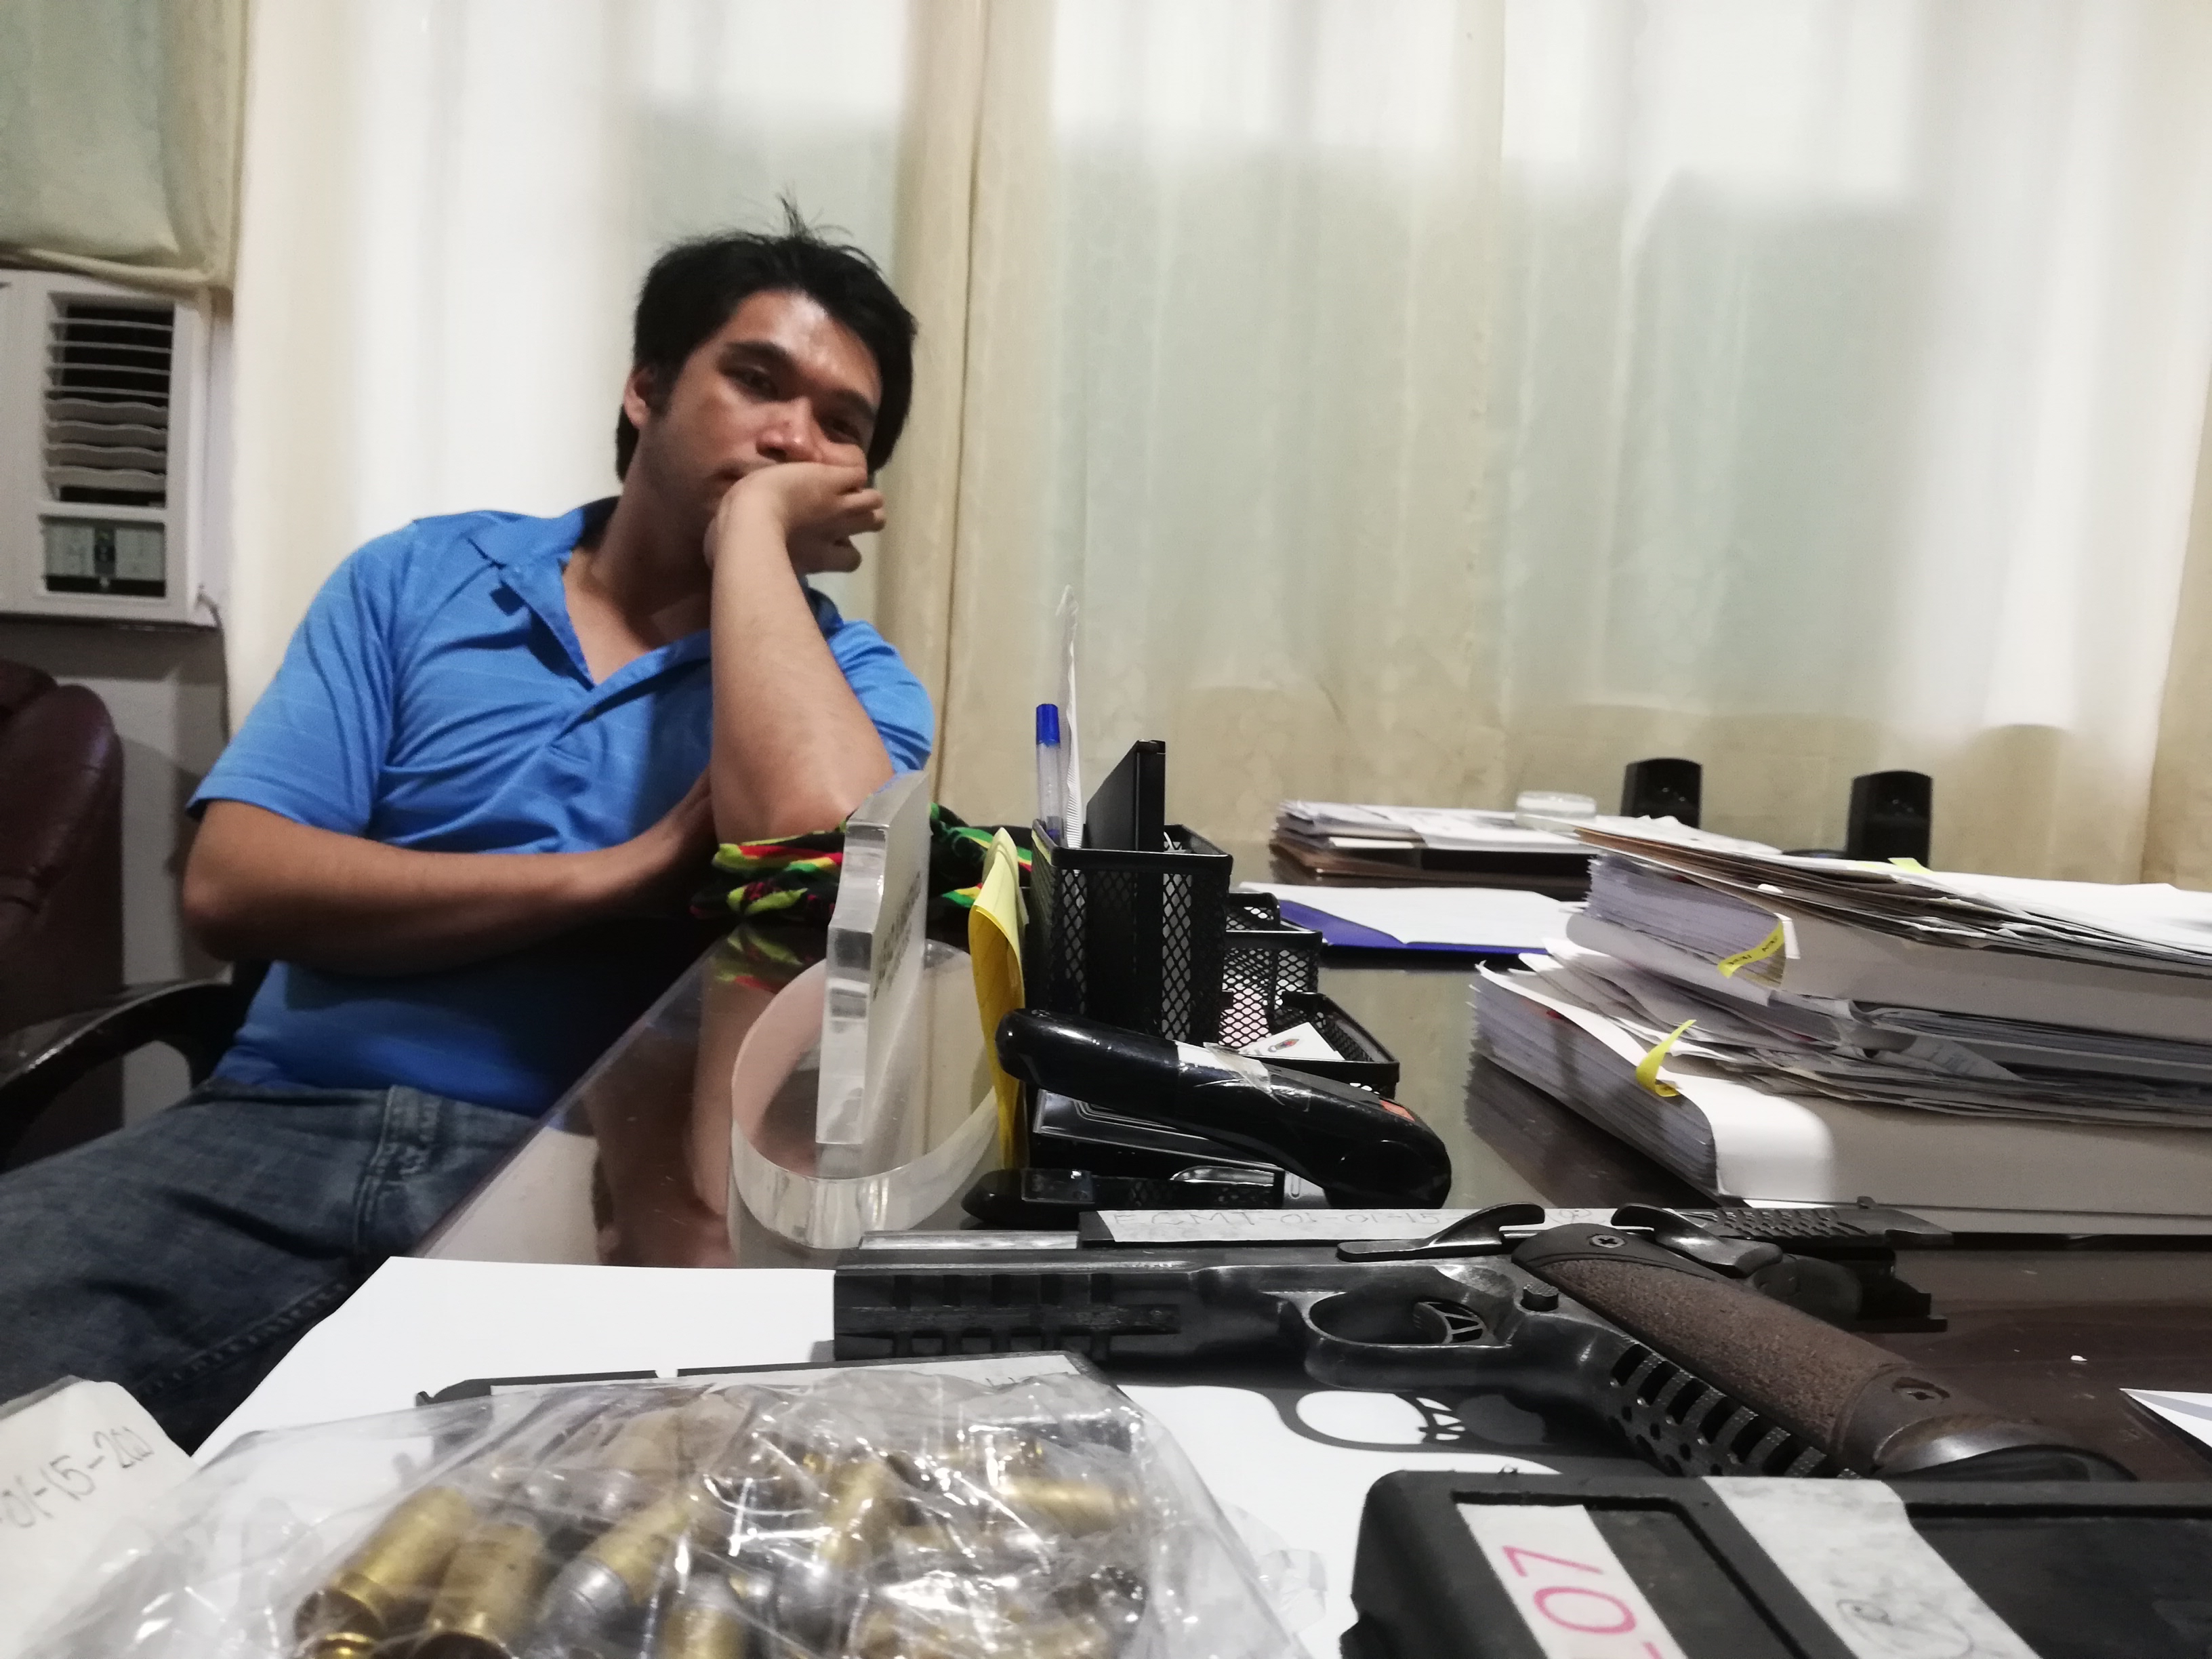 Elpren Charles "Bobec" Tungol, 32, a former mayor of Alburquerque town was arrested on Wednesday for illegal possession of firearms and ammunition. He was also tagged as the suspect in the killing of Wilfrido Plaza, a barangay councilor and trusted aide of incumbent Alburquerque Mayor Don Ritchie Buates. (Photo by Helen Castaño)